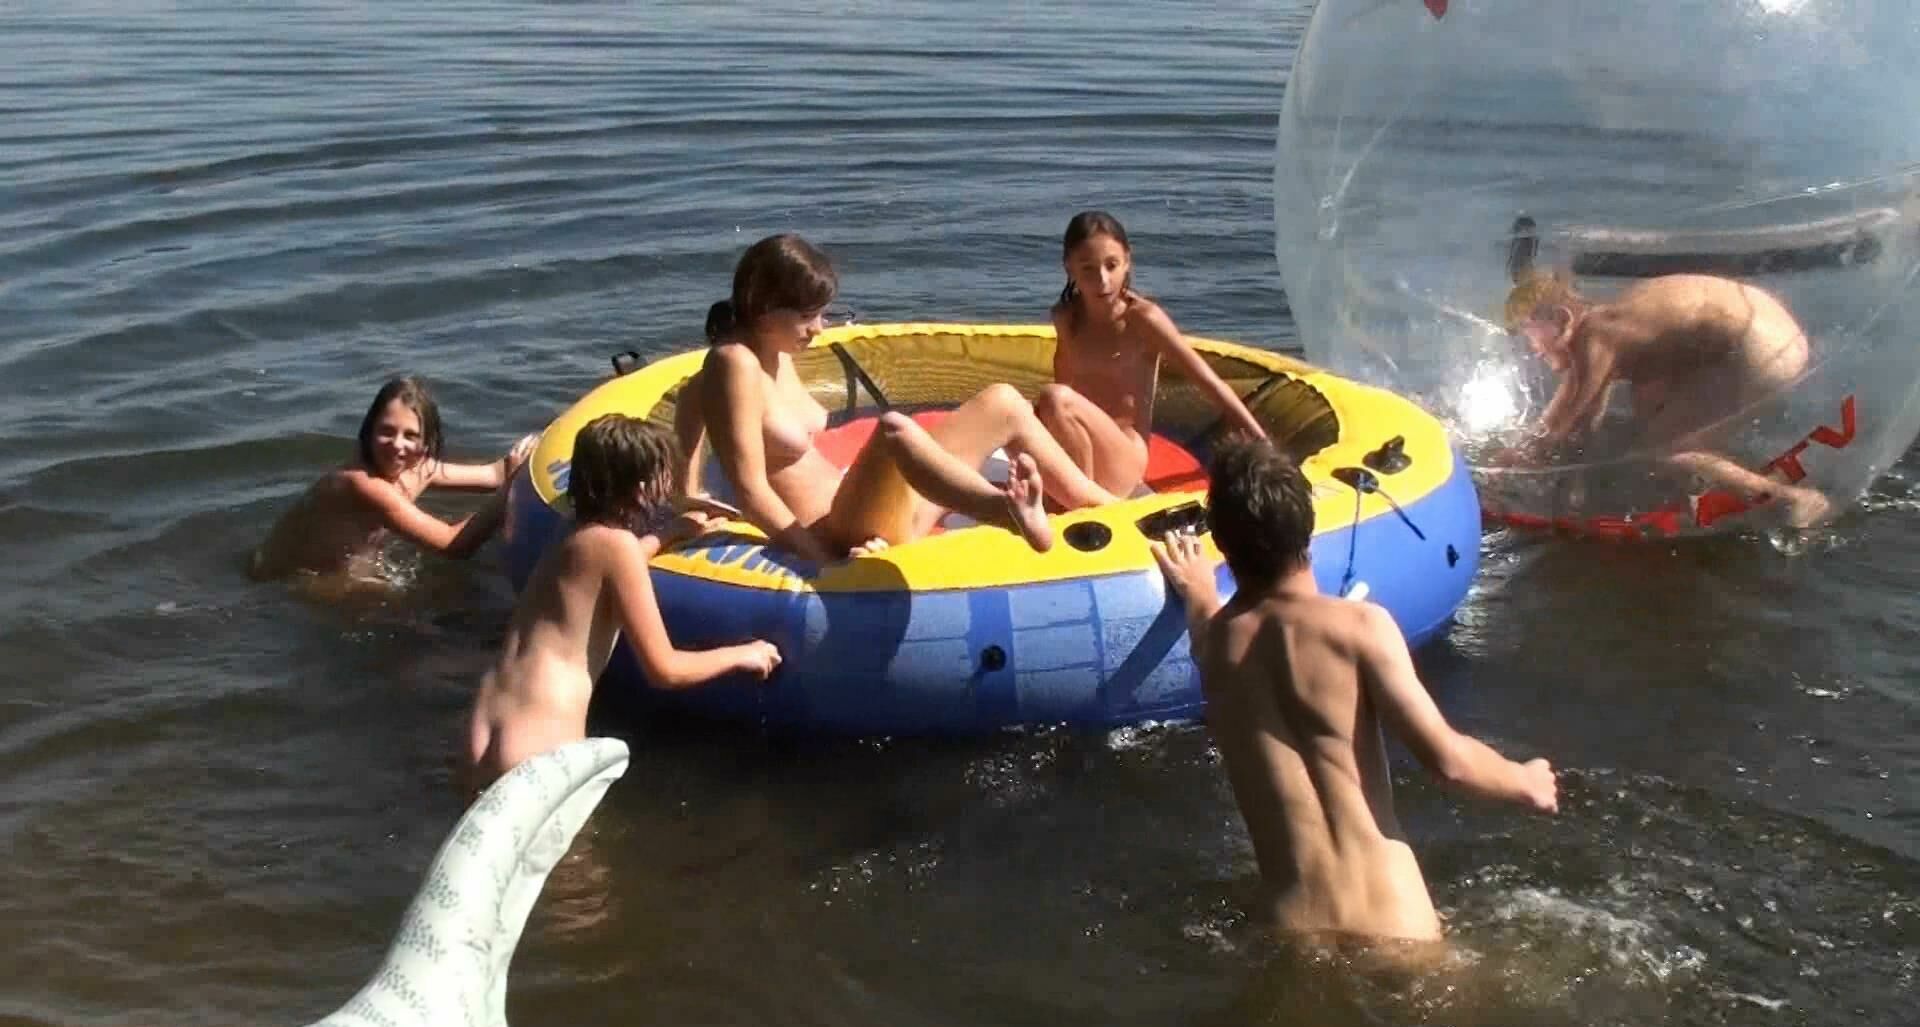 Family nudism video - Nude and hot summer day [Purenudism]